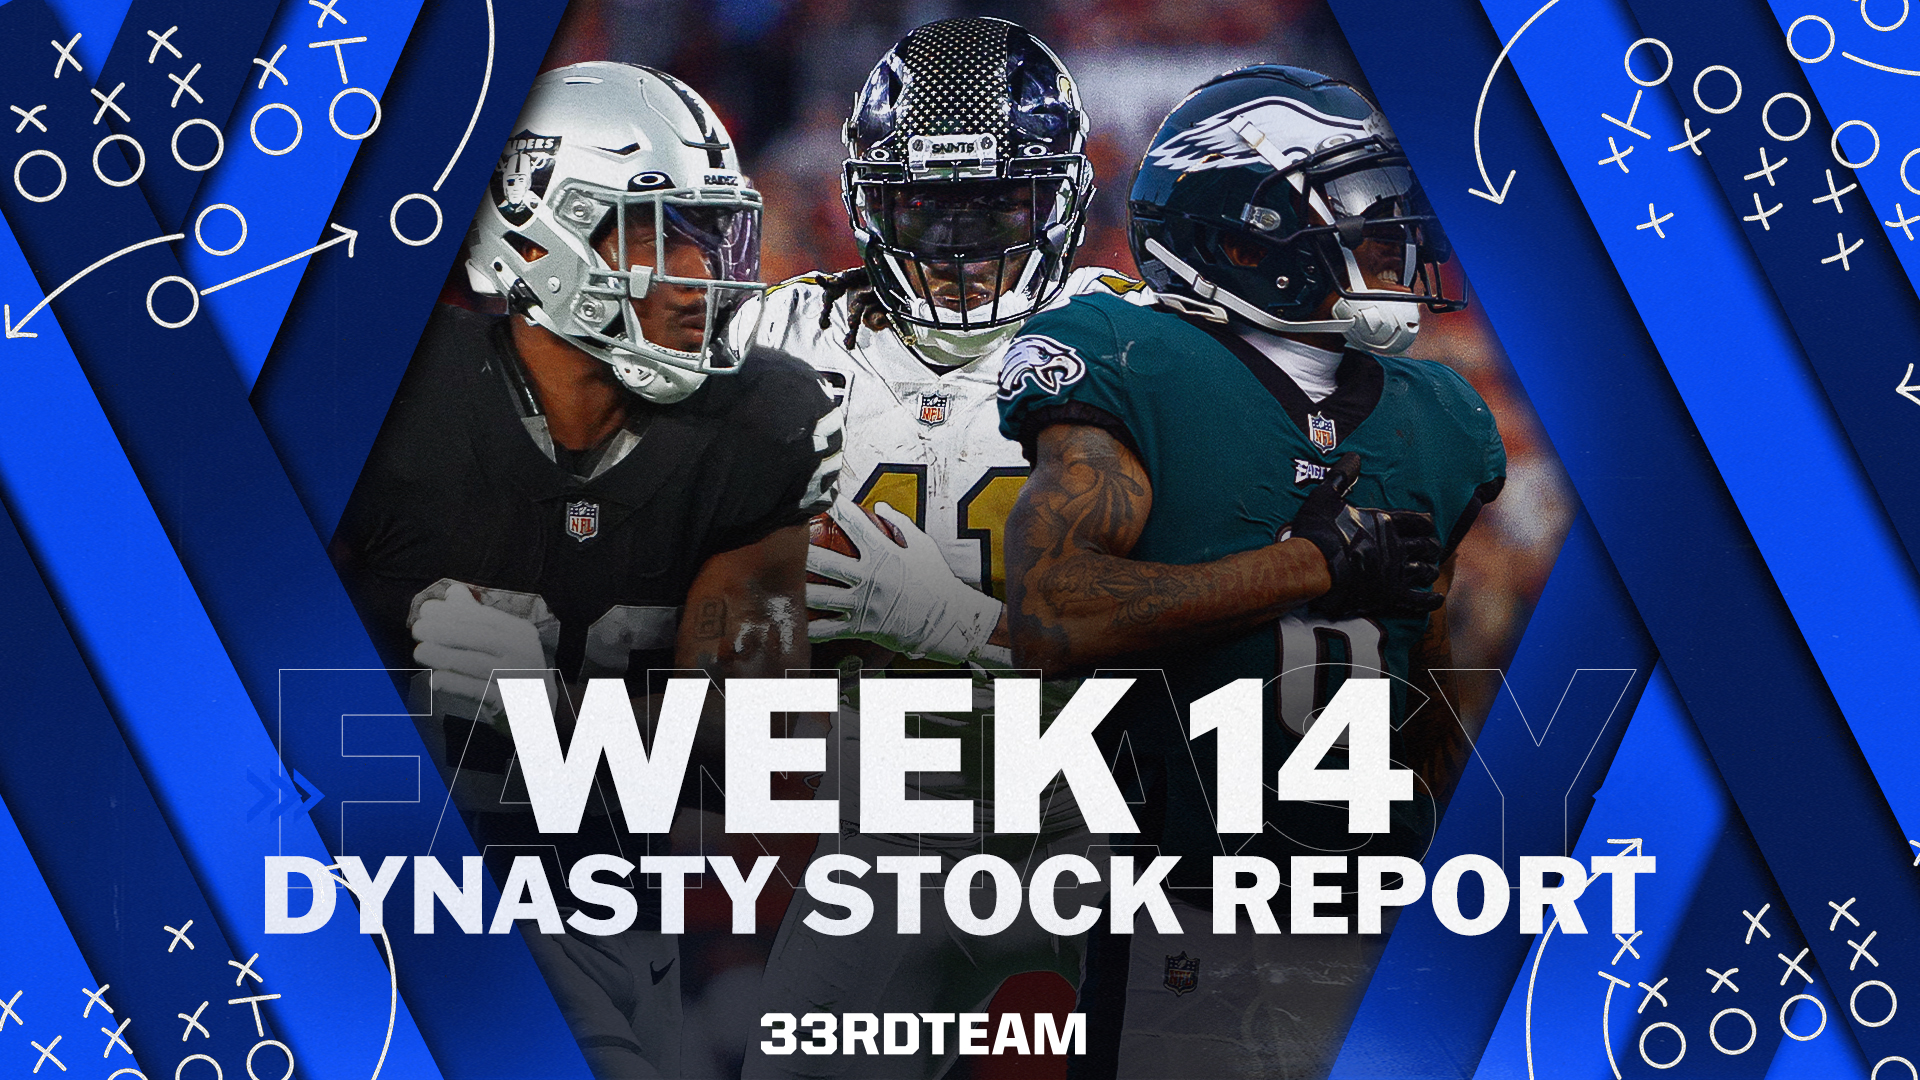 Dynasty Stock Report for NFL Week 14 Fantasy Football